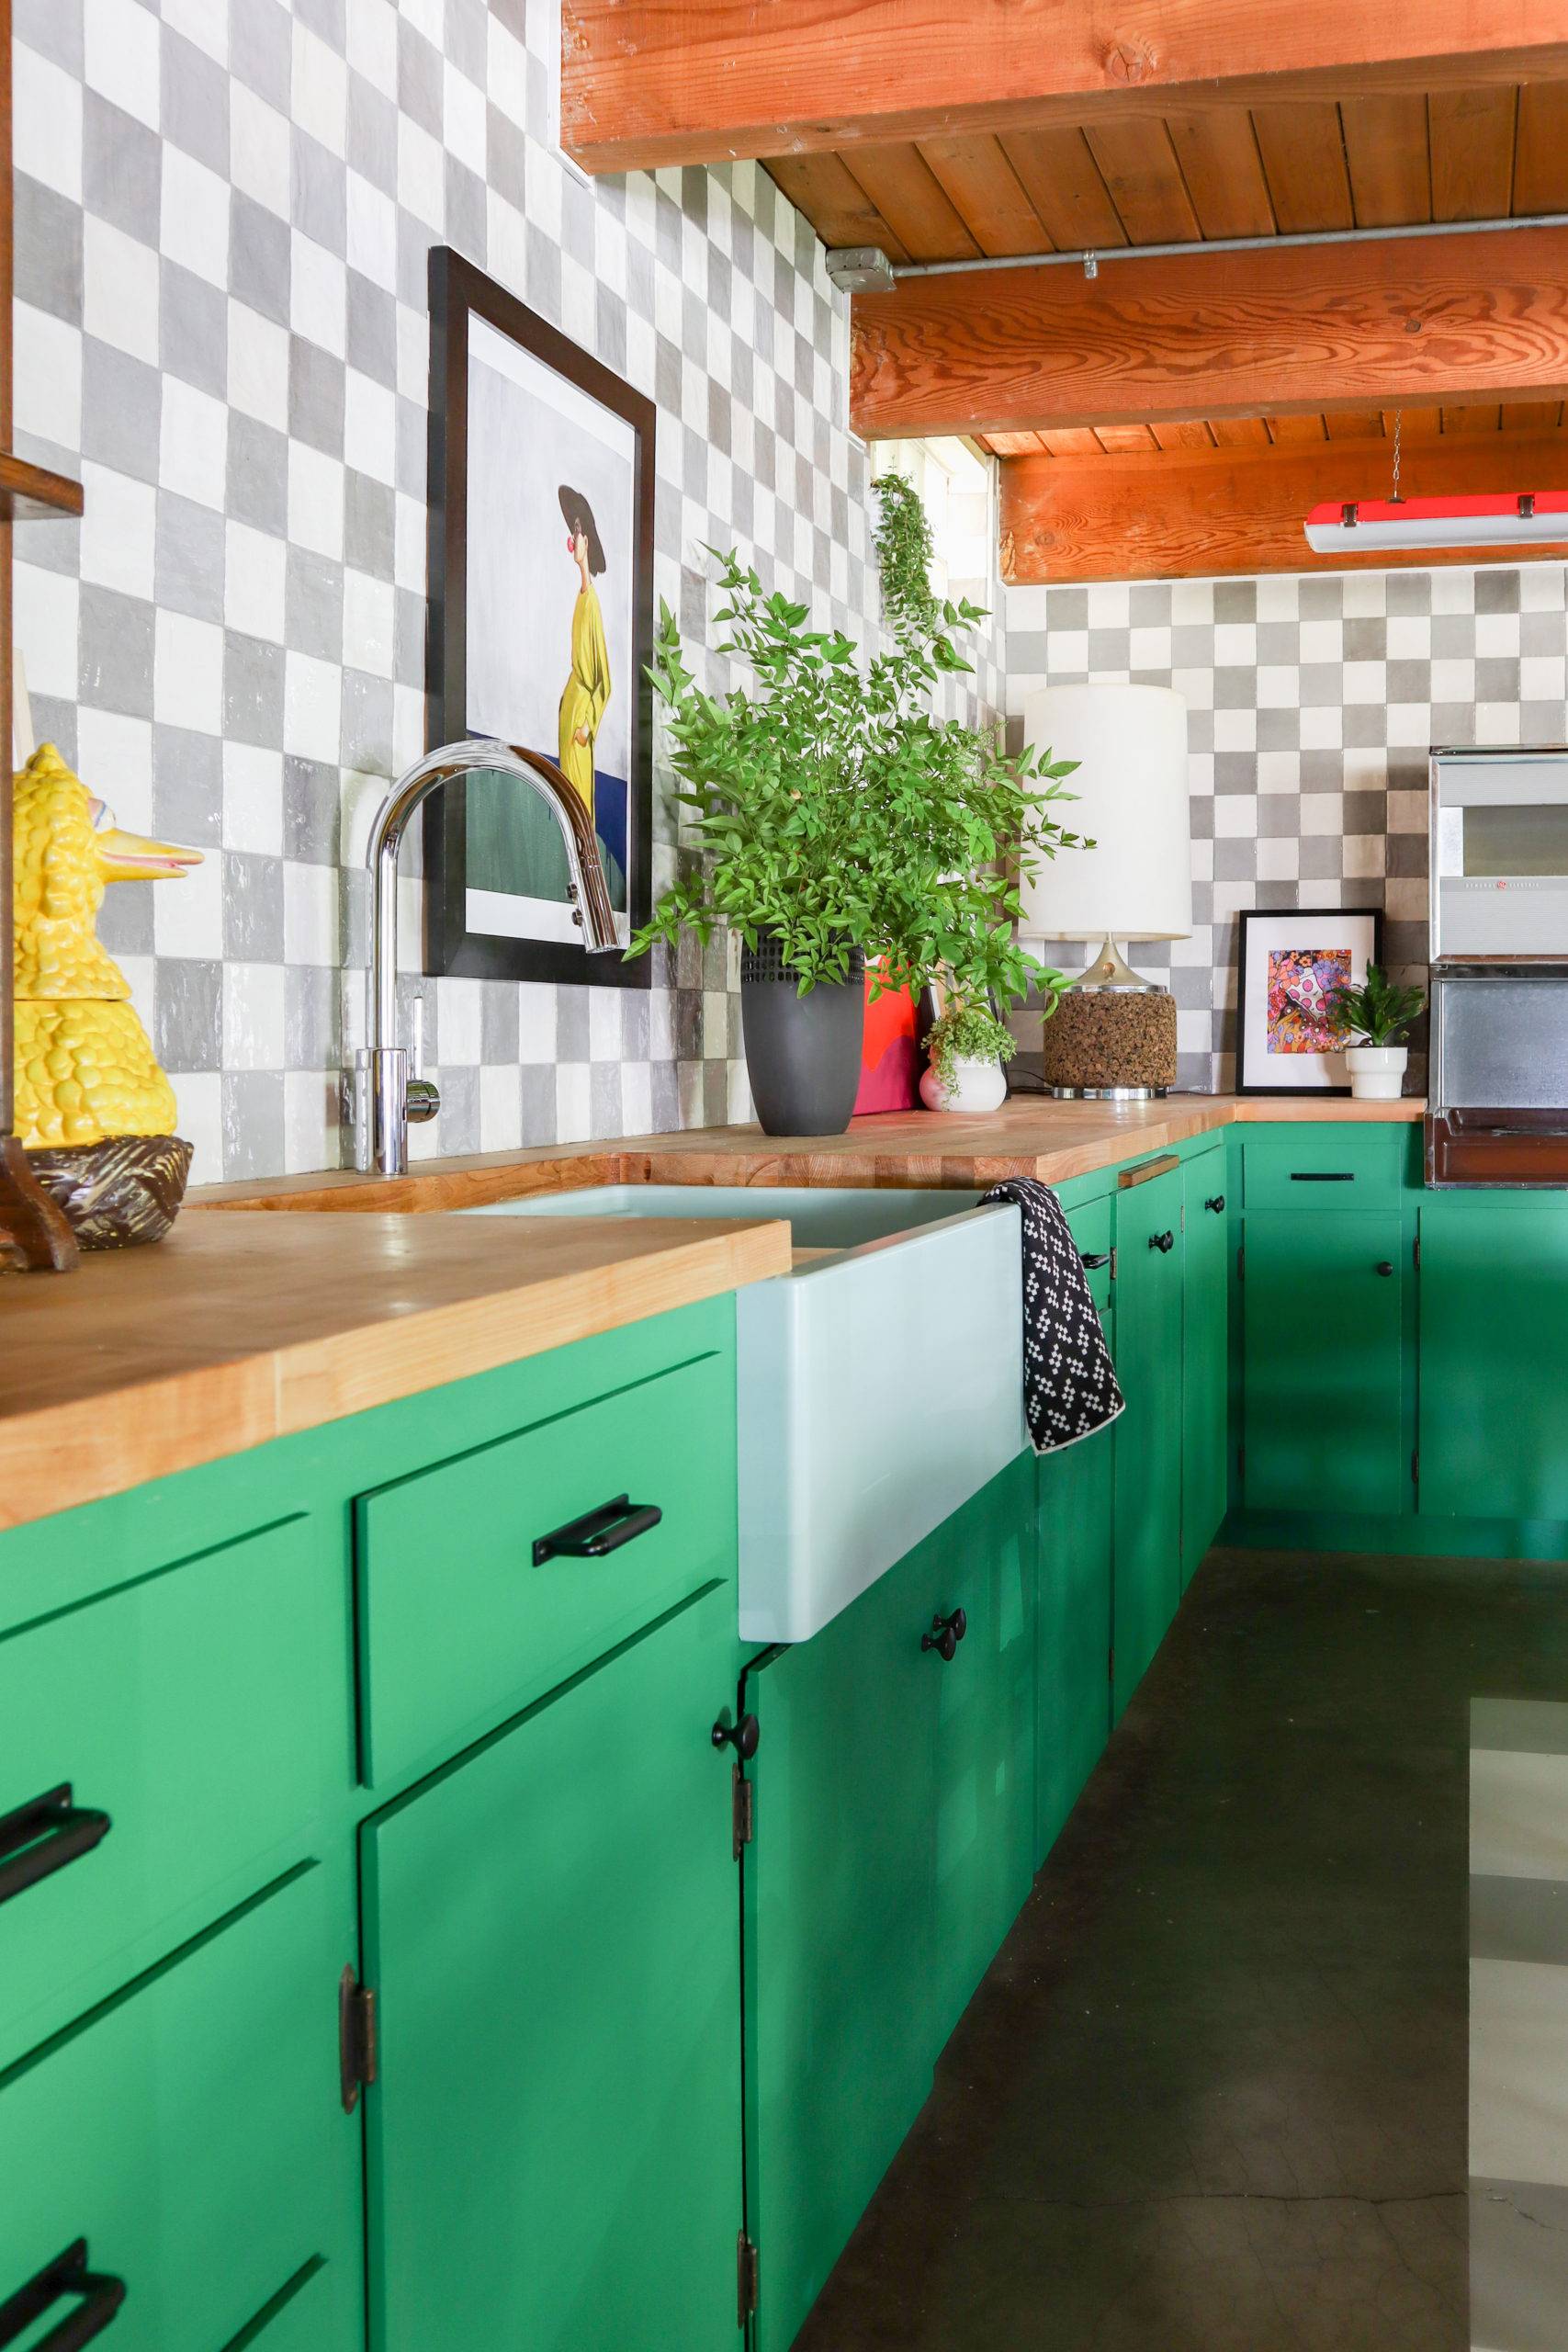 Eclectic basement kitchen with green cabinetry and tiled checkerboard backsplash